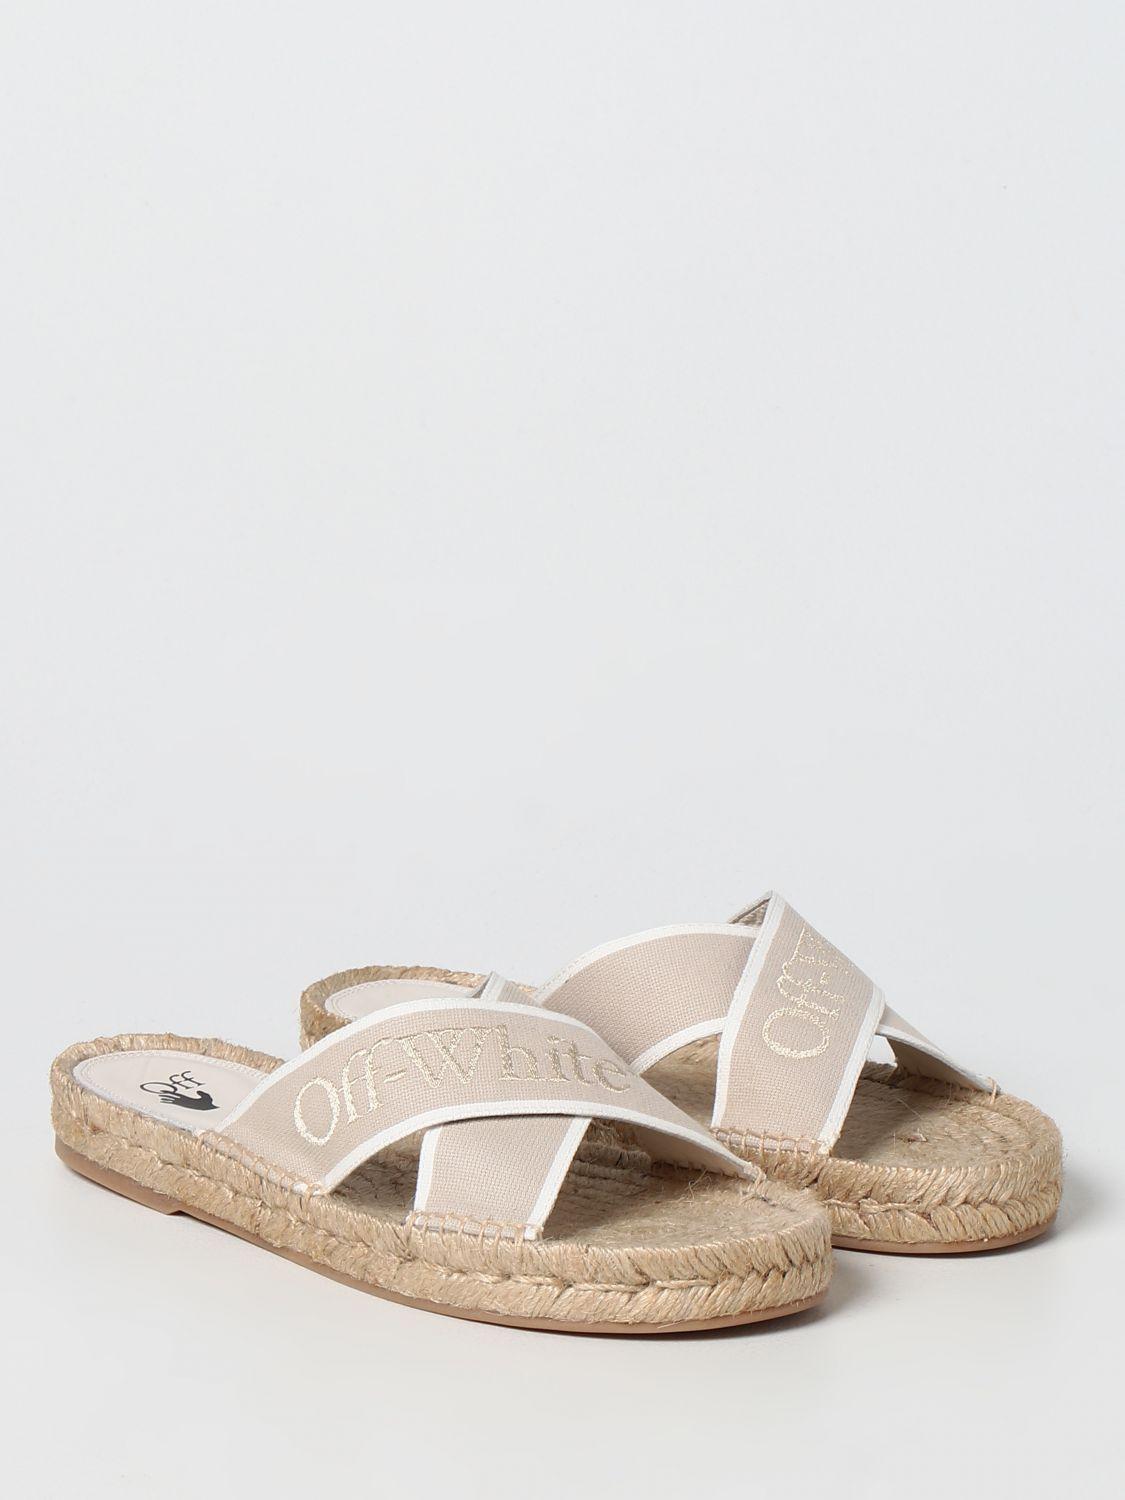 Womens Shoes Flats and flat shoes Espadrille shoes and sandals White Off-White c/o Virgil Abloh Leather Espadrilles in Beige 